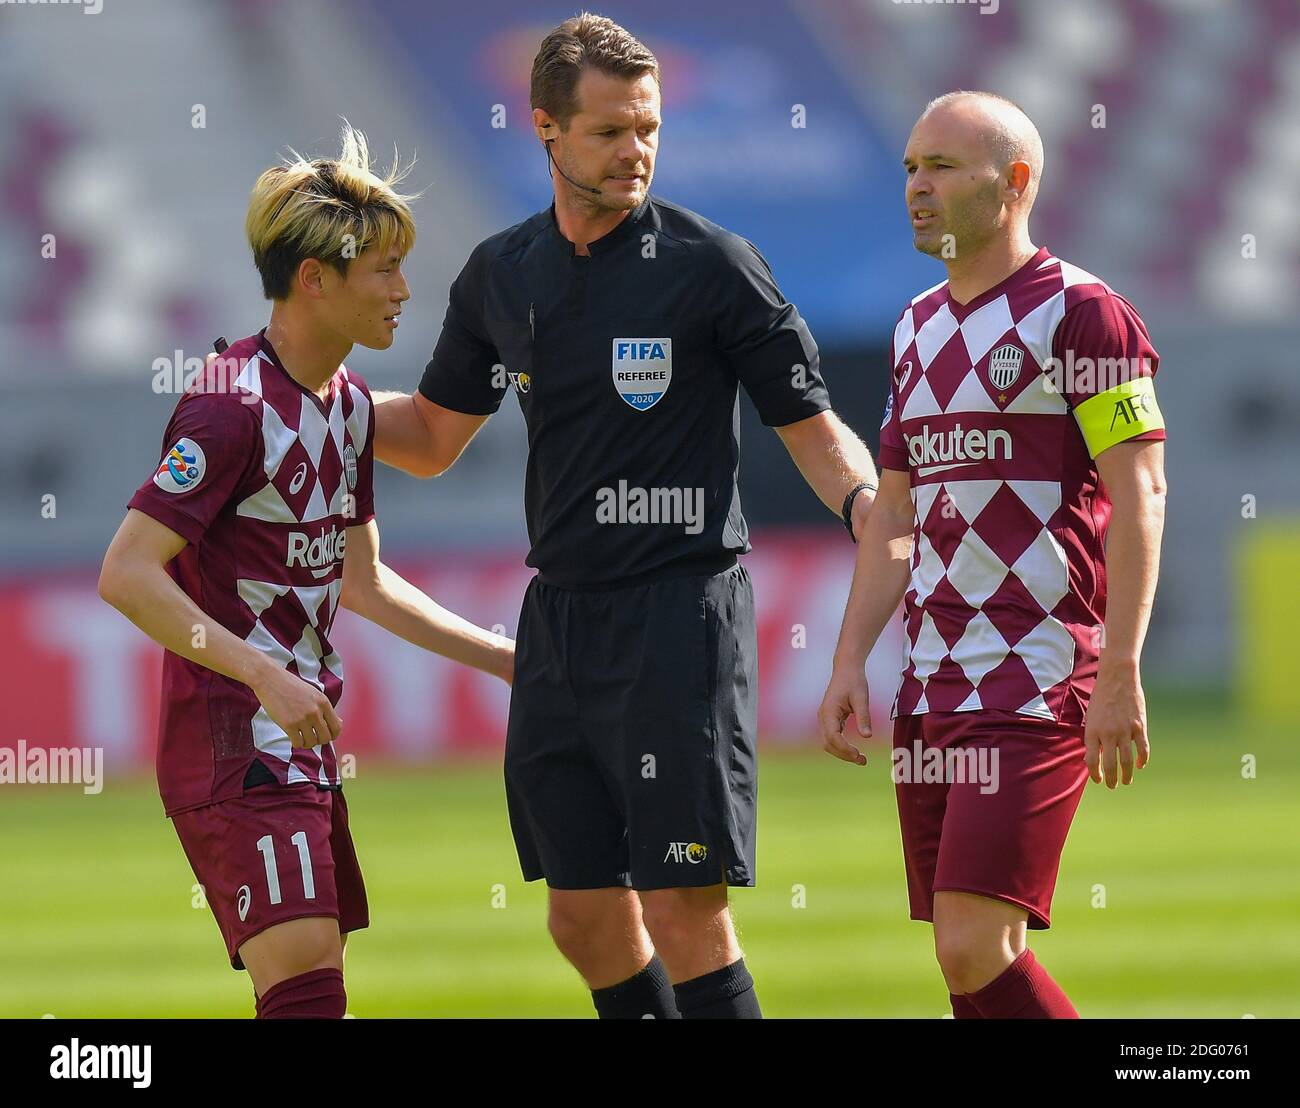 Doha, Qatar. 7th Dec, 2020. Andres Iniesta (R) of Vissel Kobe reacts during the round of 16 match of the AFC Champions League between Shanghai SIPG FC of China and Vissel Kobe of Japan in Doha, Qatar, Dec. 7, 2020. Credit: Nikku/Xinhua/Alamy Live News Stock Photo